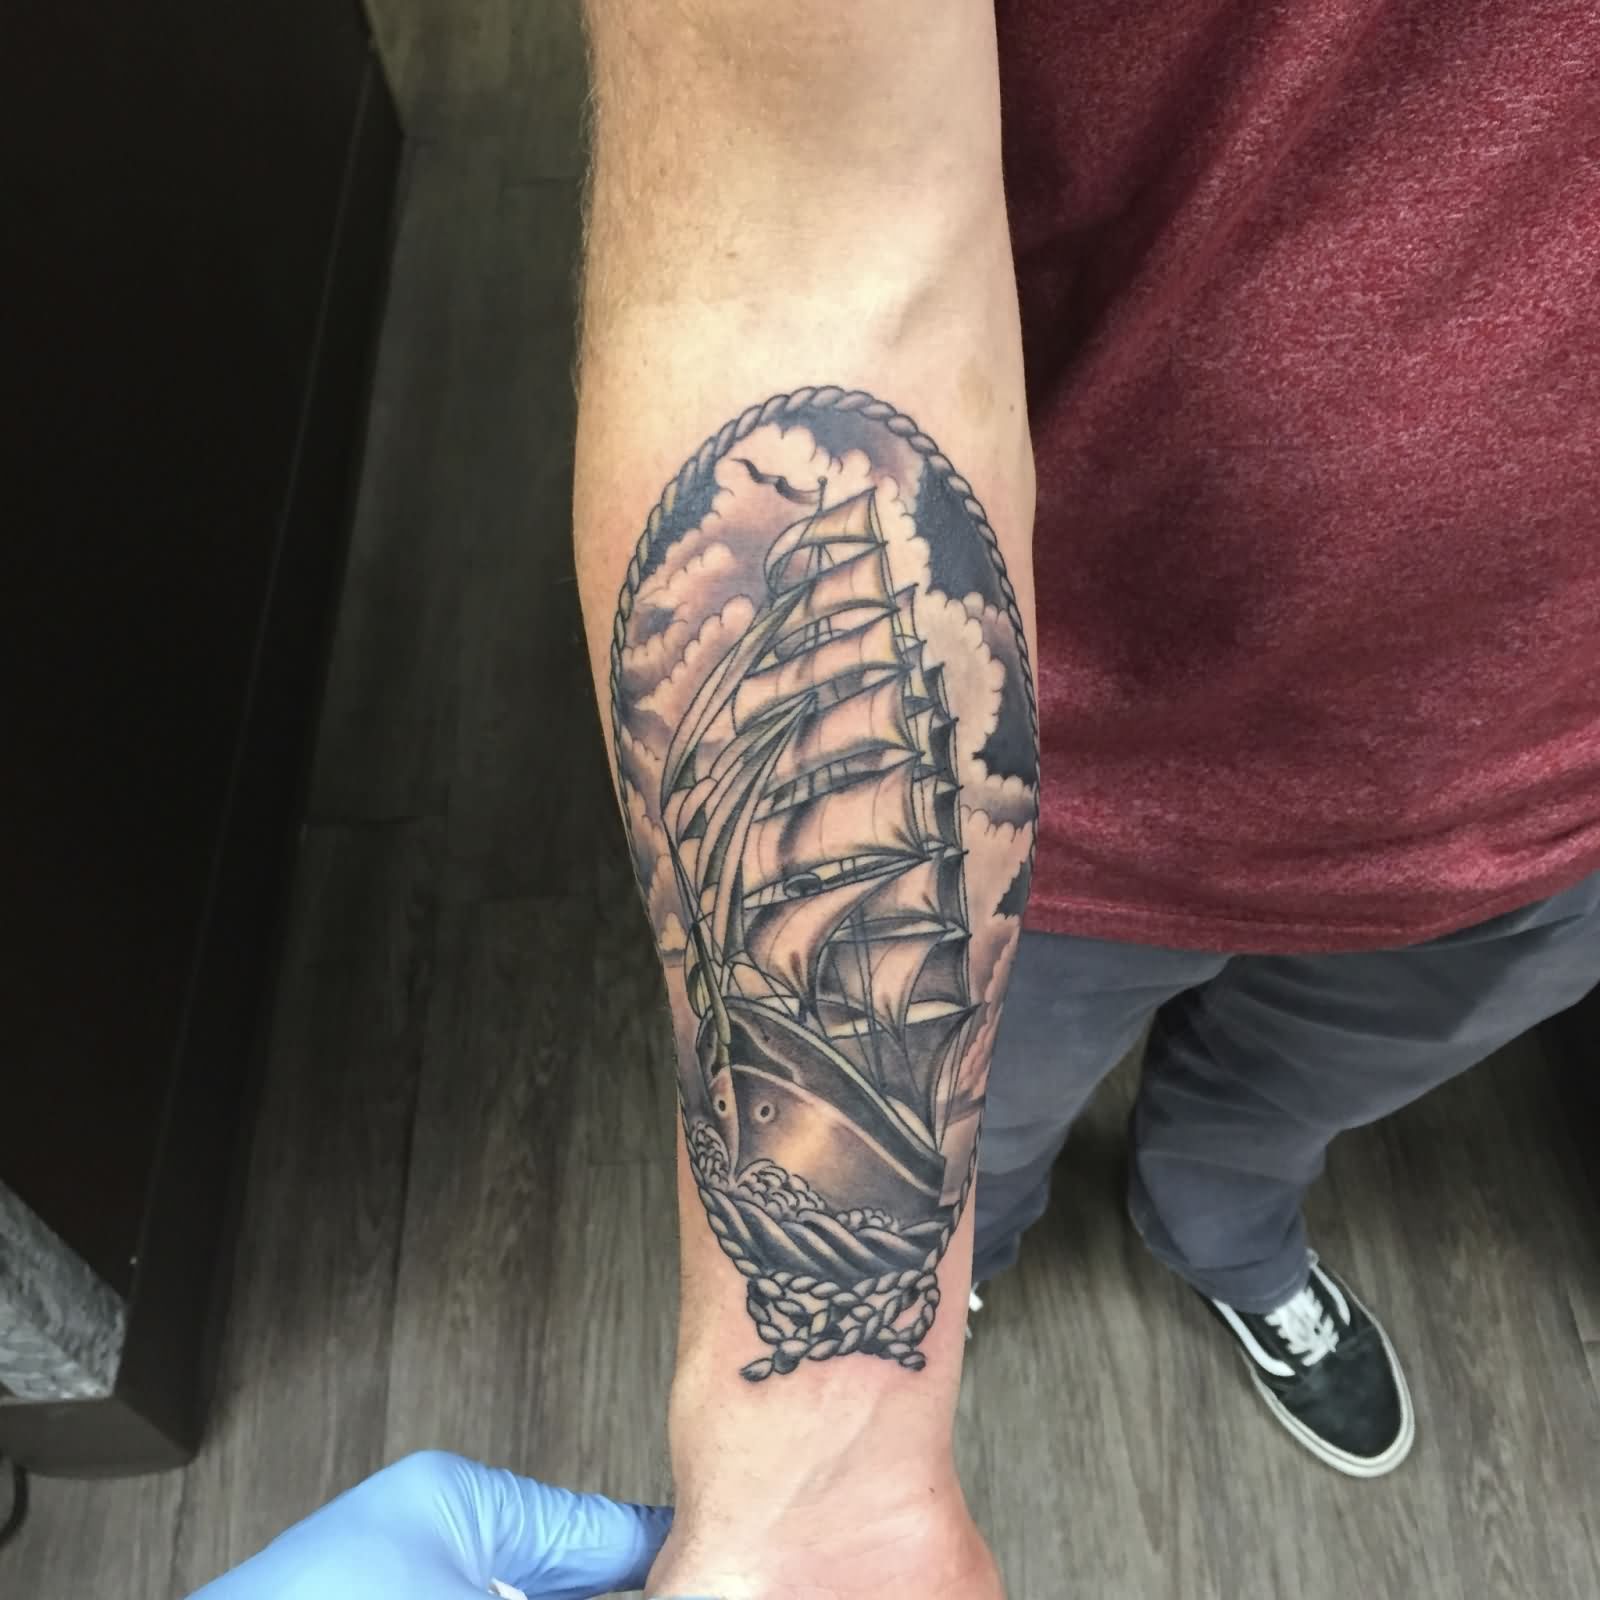 Black Ink Ship In Frame Tattoo On Right Forearm